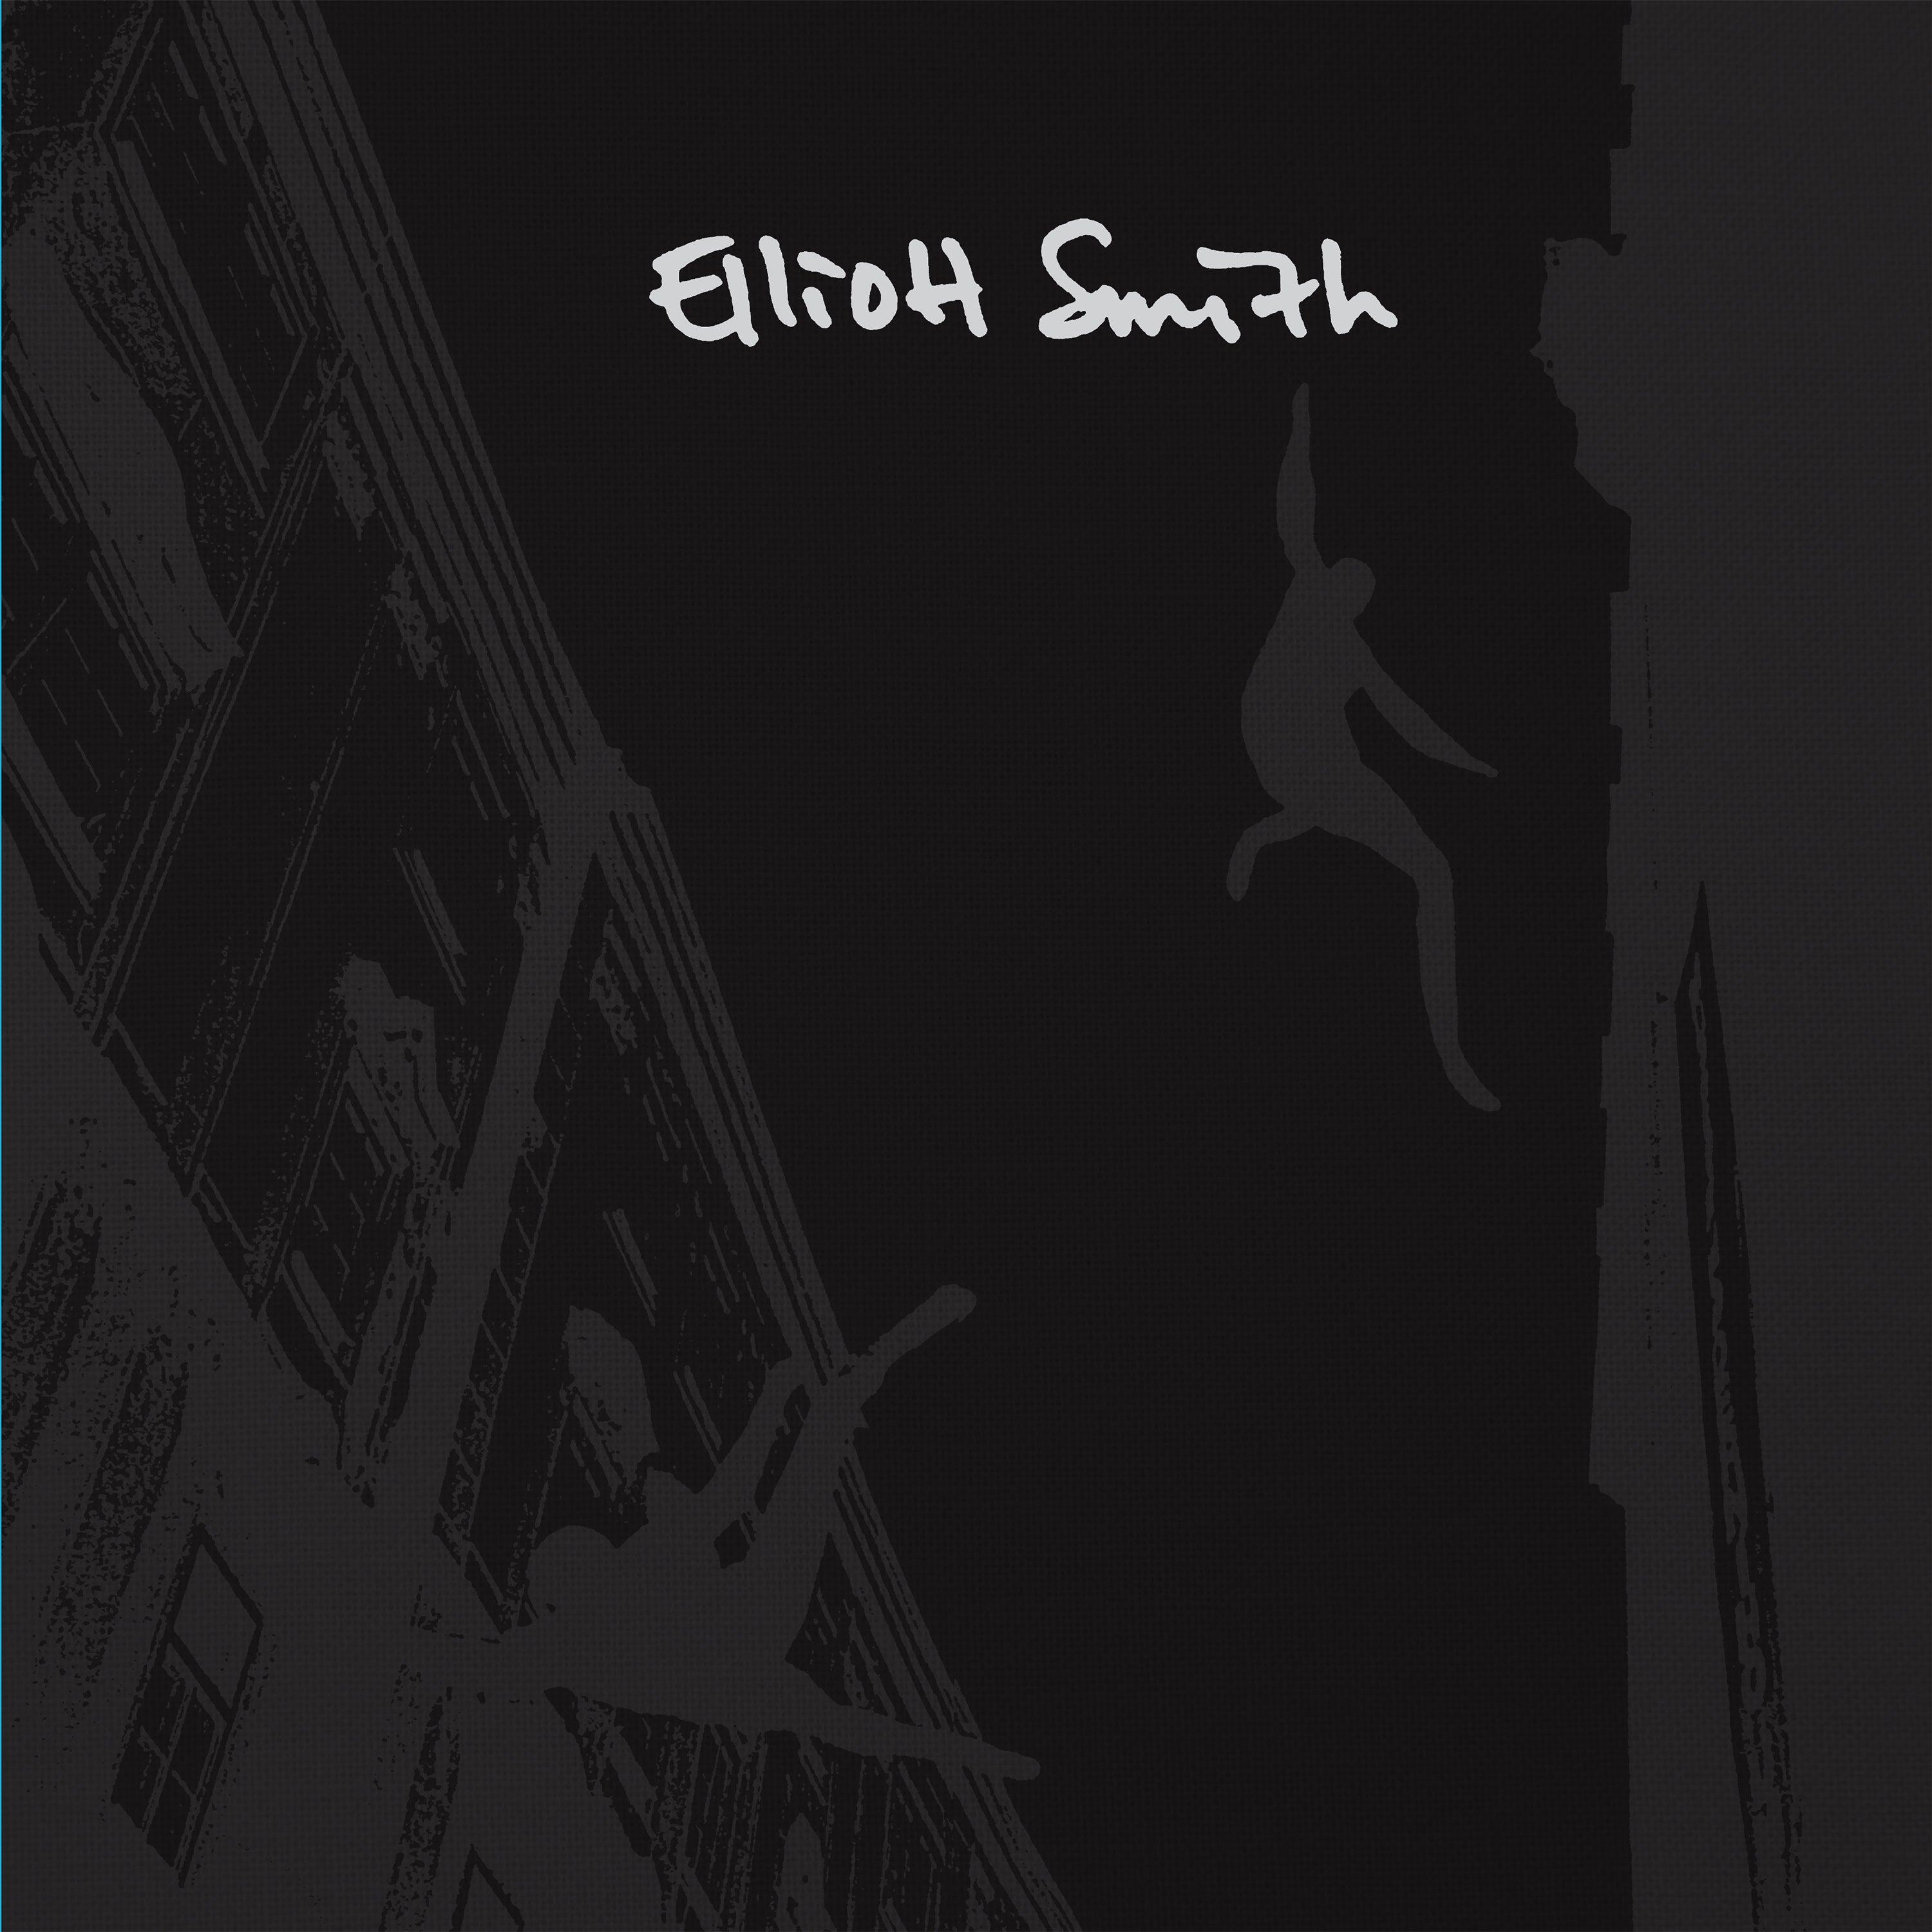 Elliott Smith: Expanded 25th Anniversary Edition